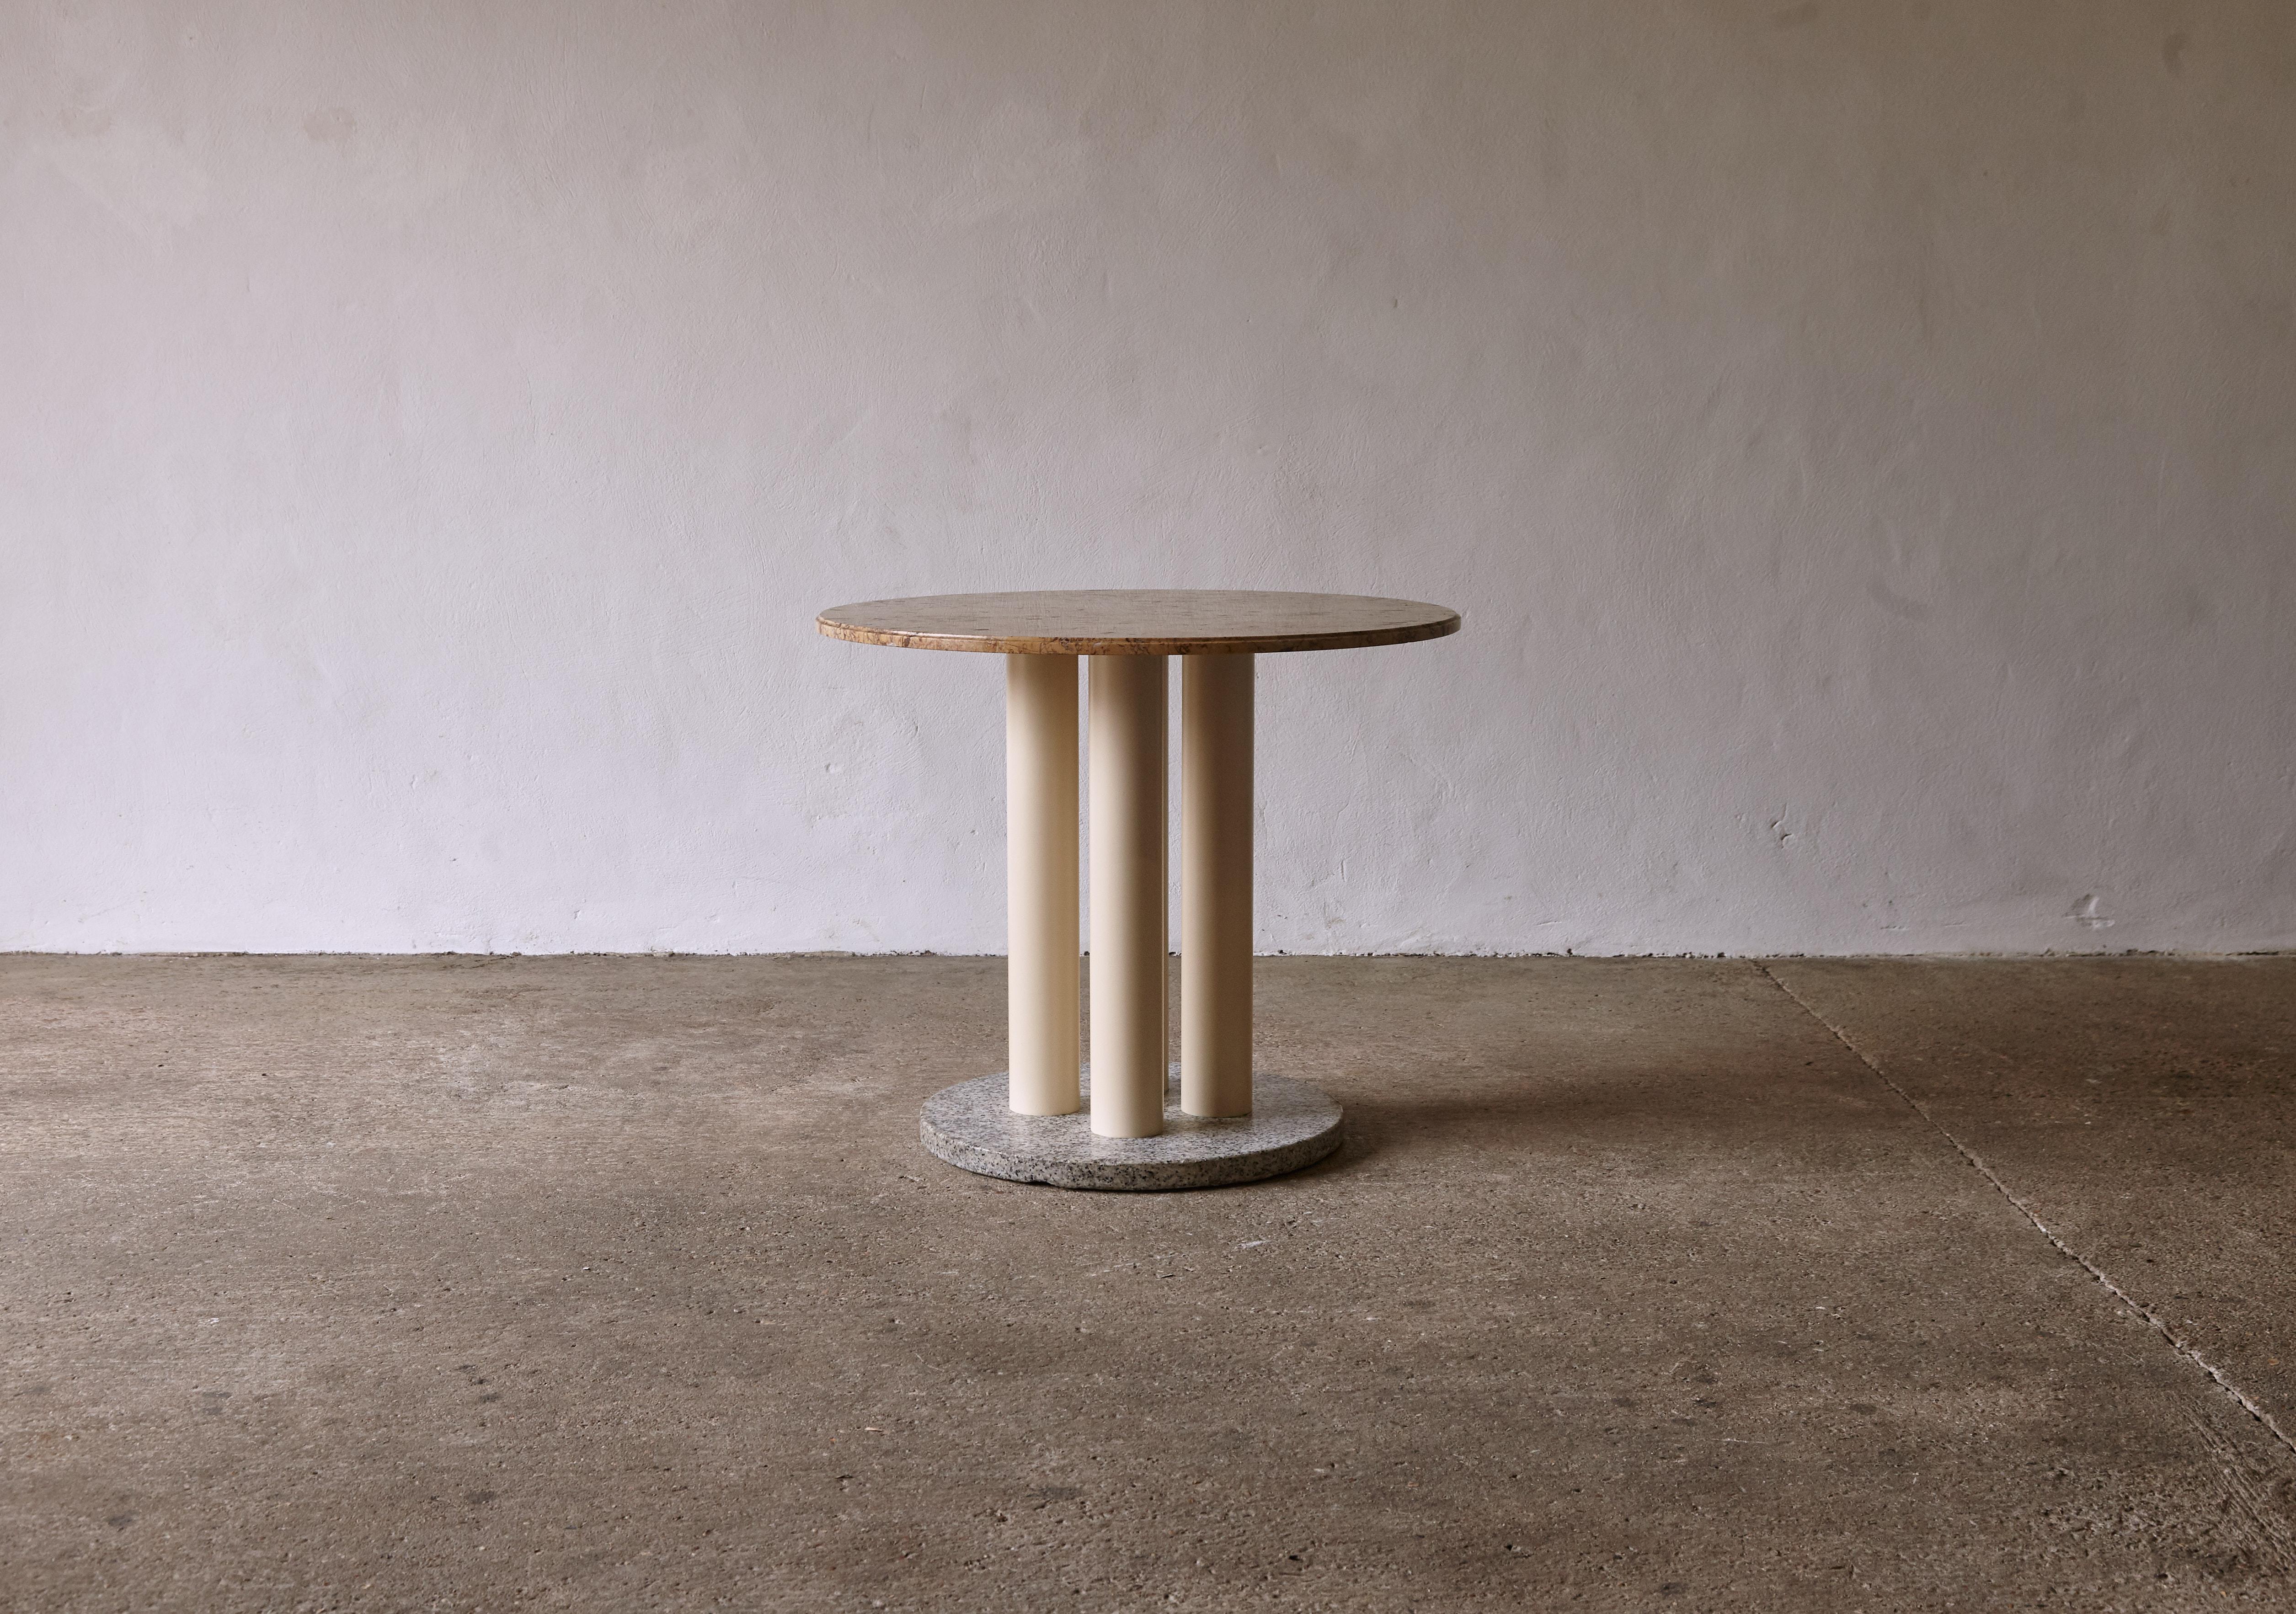 An unusual, unique table in the style of Ettore Sottsass, France, 1970/80s. Black and white stone or marble base, four lacquered metal legs and a reddish / yellow marble or stone top. Fast shipping worldwide.

